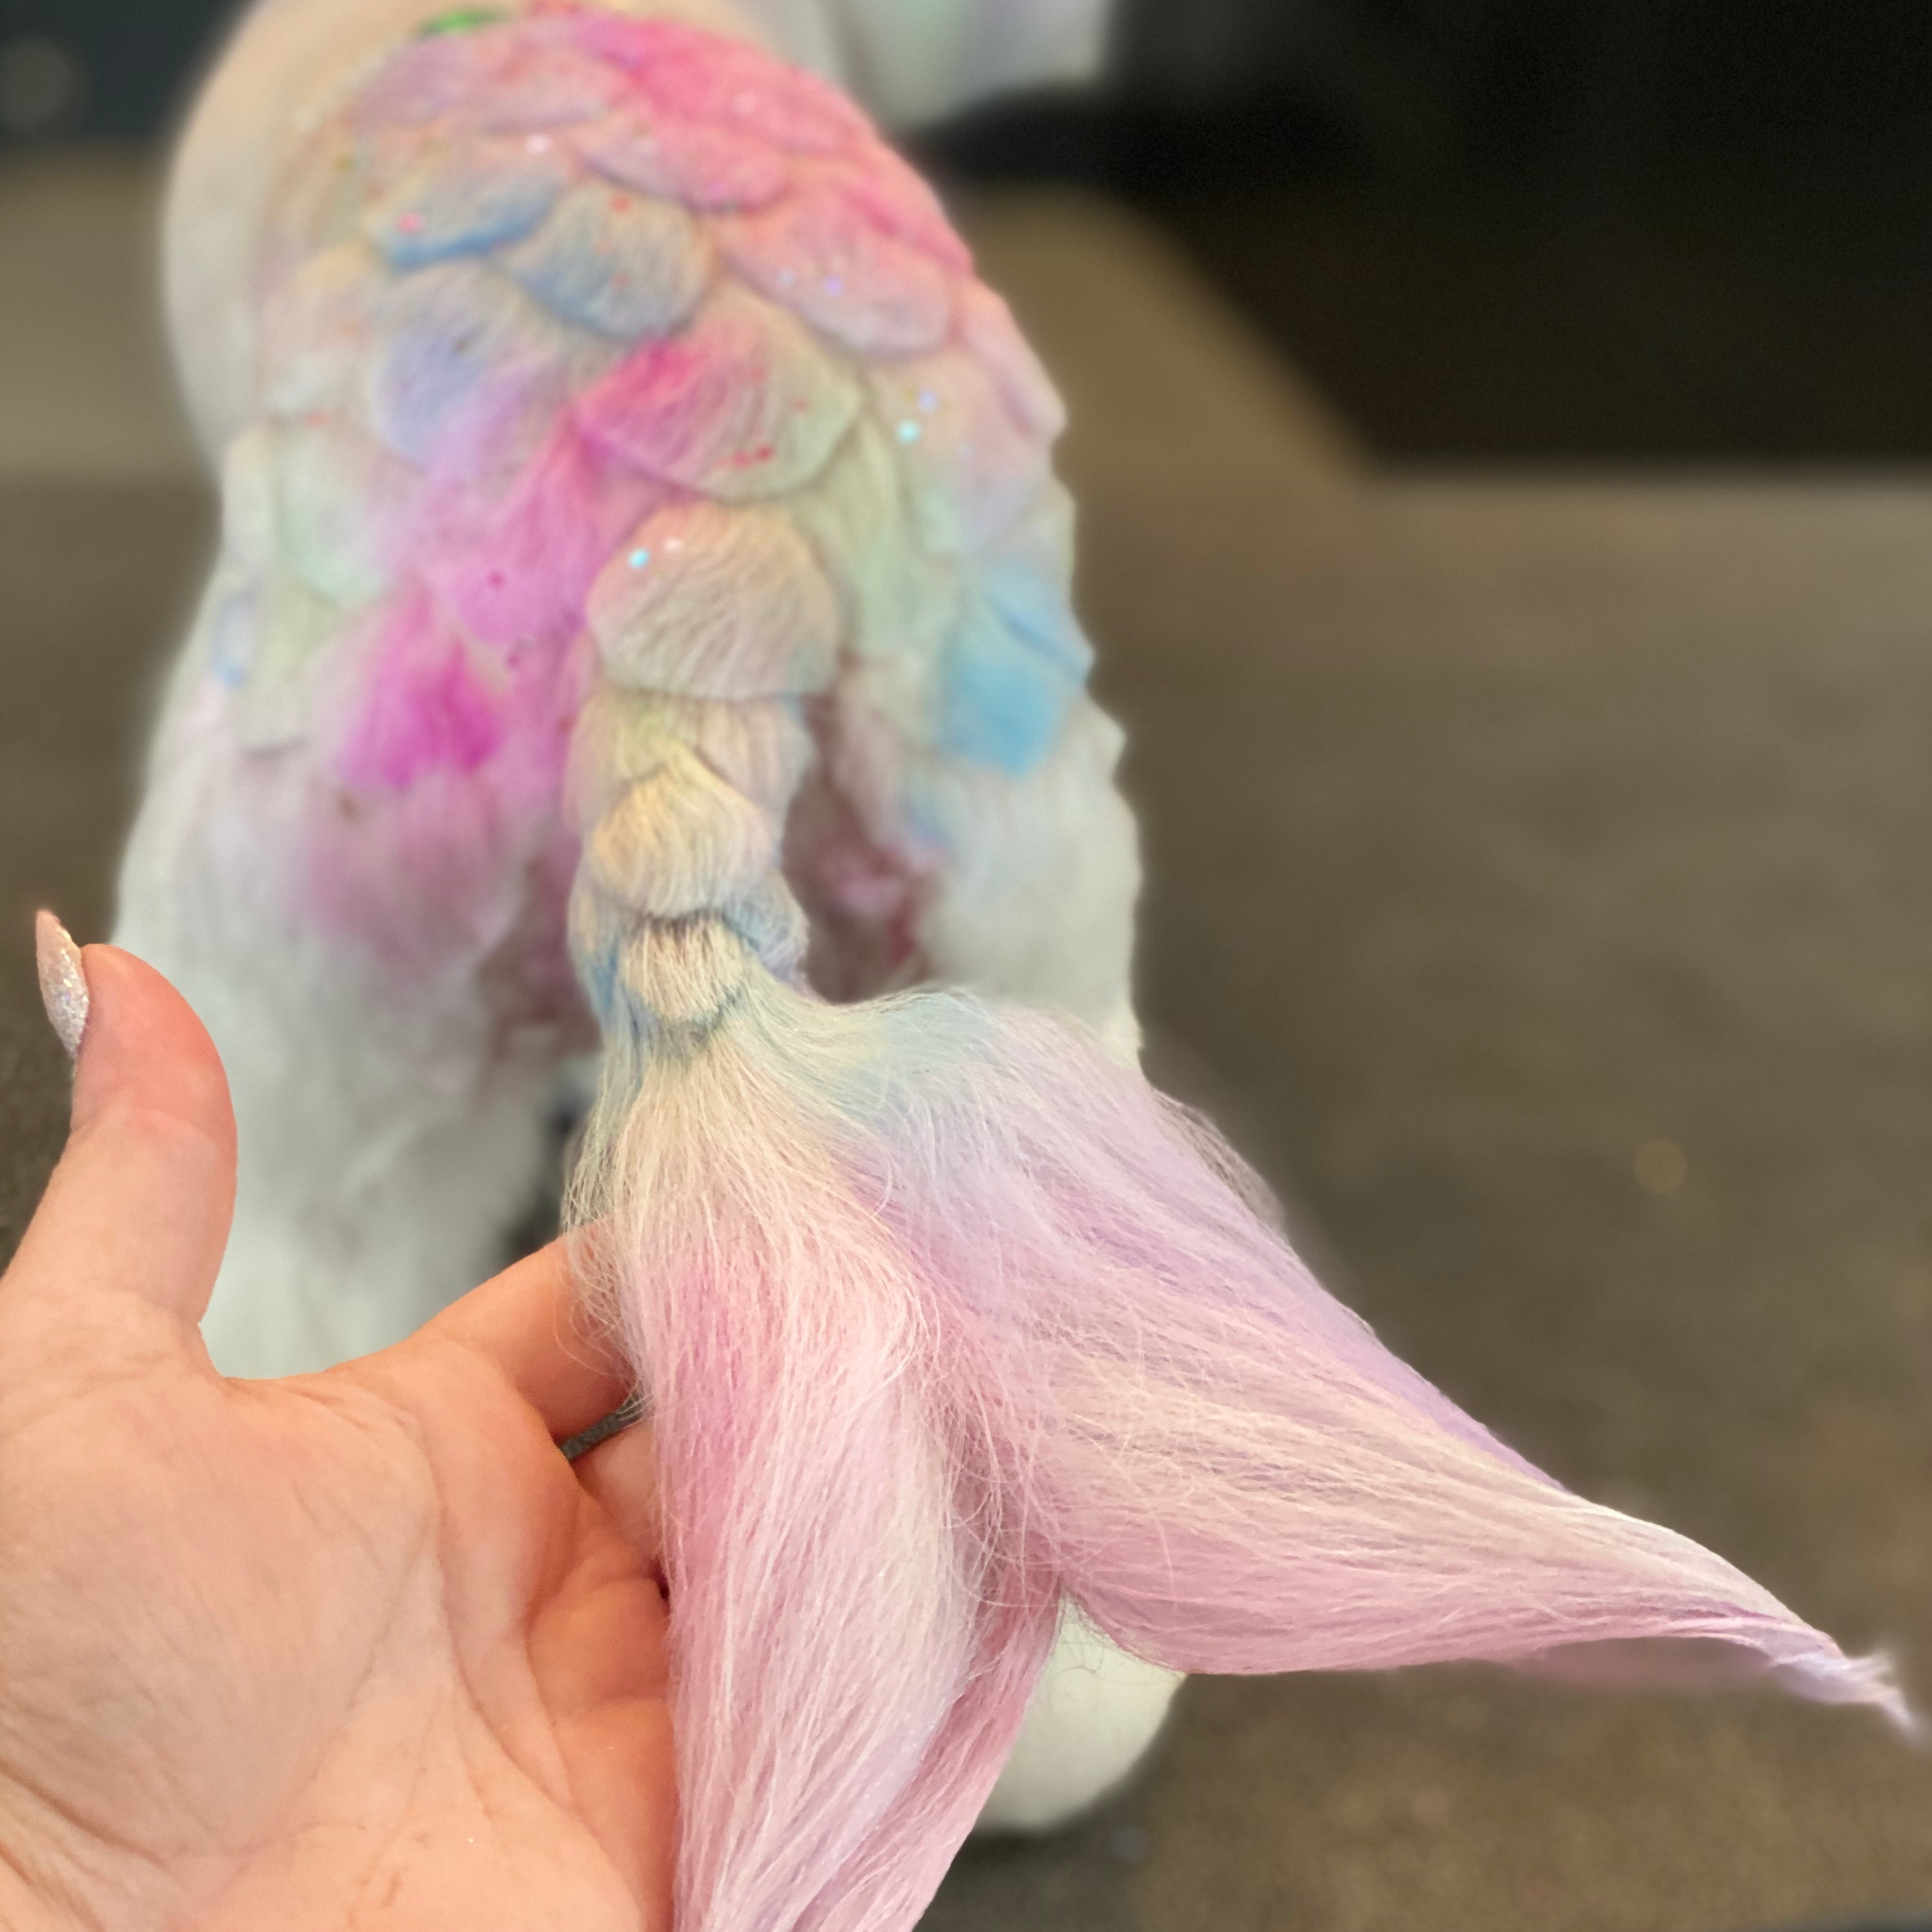 Colorful mermaid fishtail design in dog’s tail created by Andis groomer.